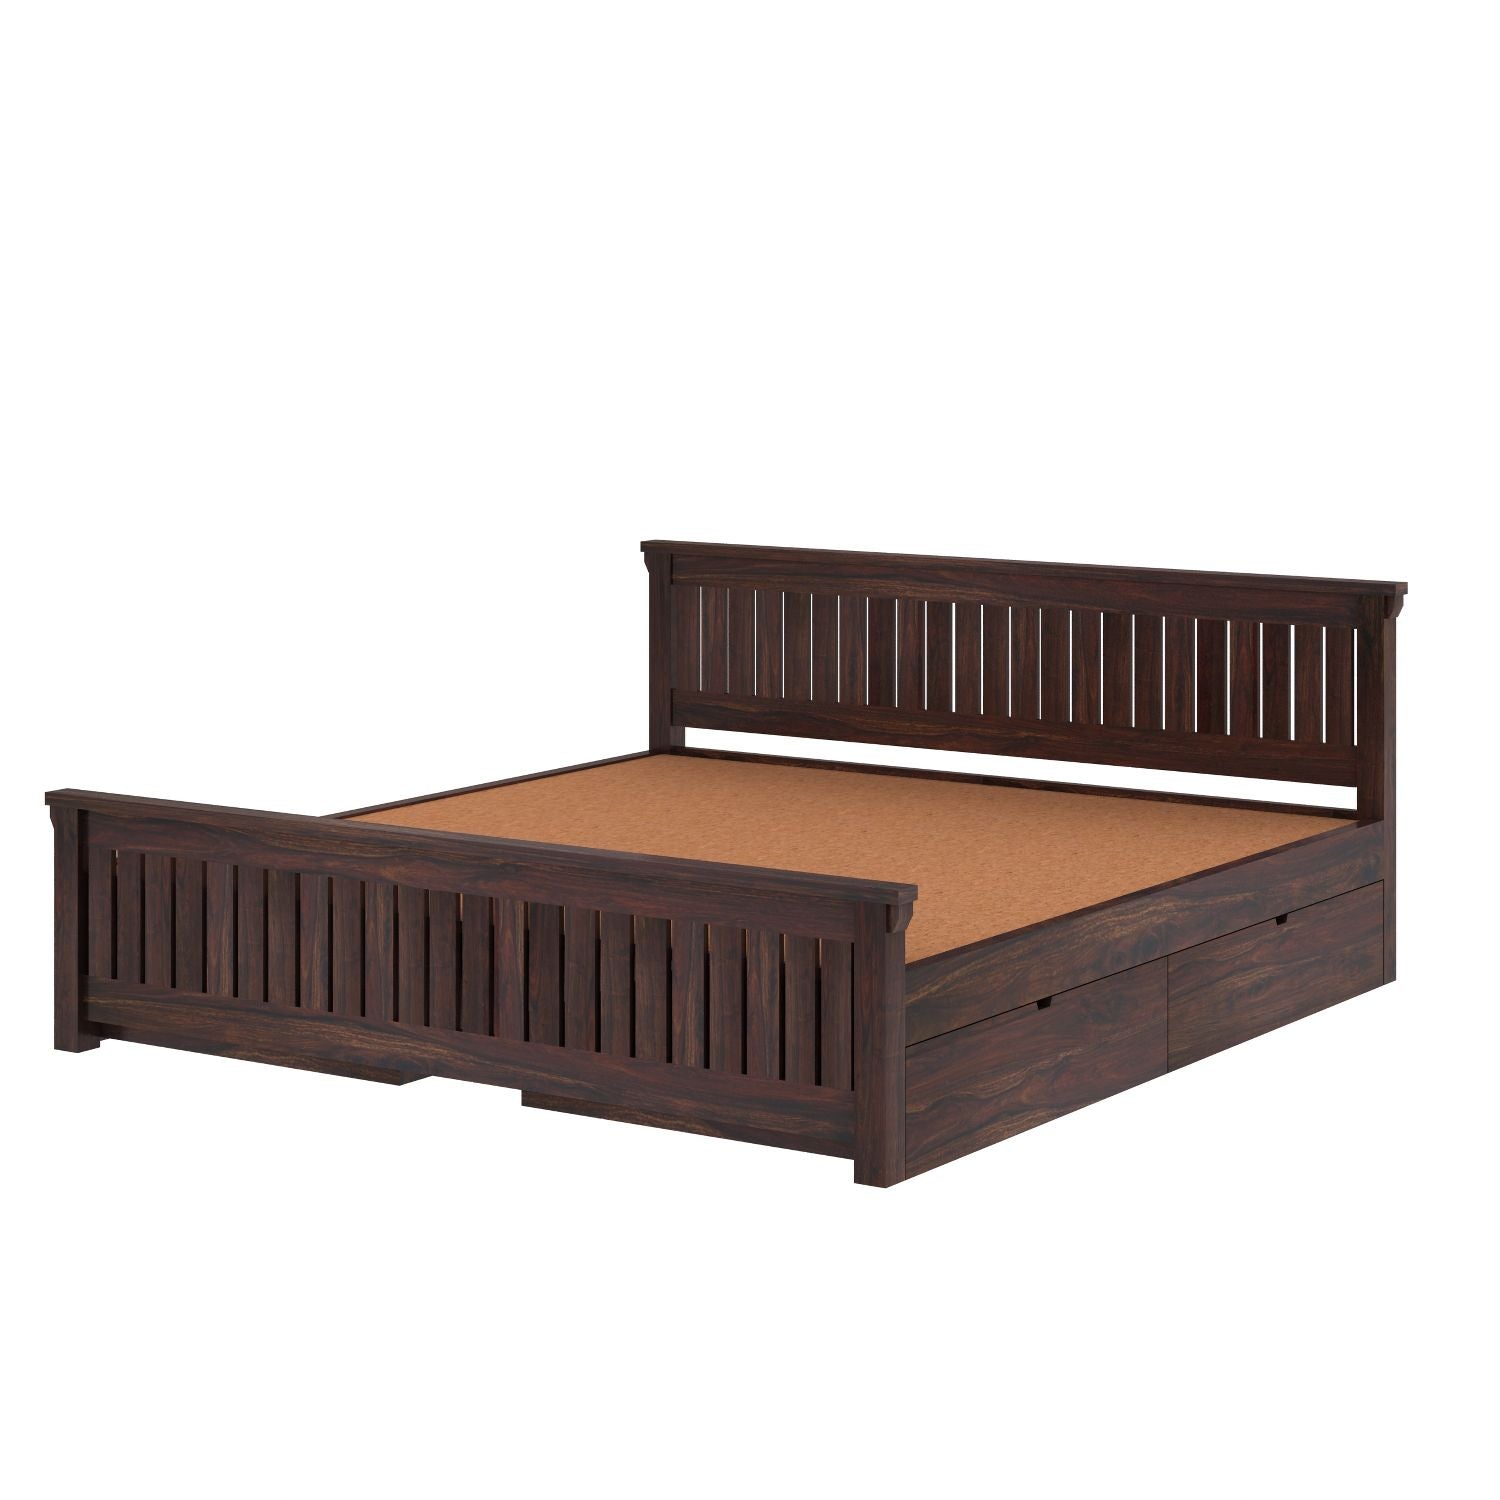 Trinity Solid Sheesham Wood Bed With Four Drawers (Queen Size, Walnut Finish)